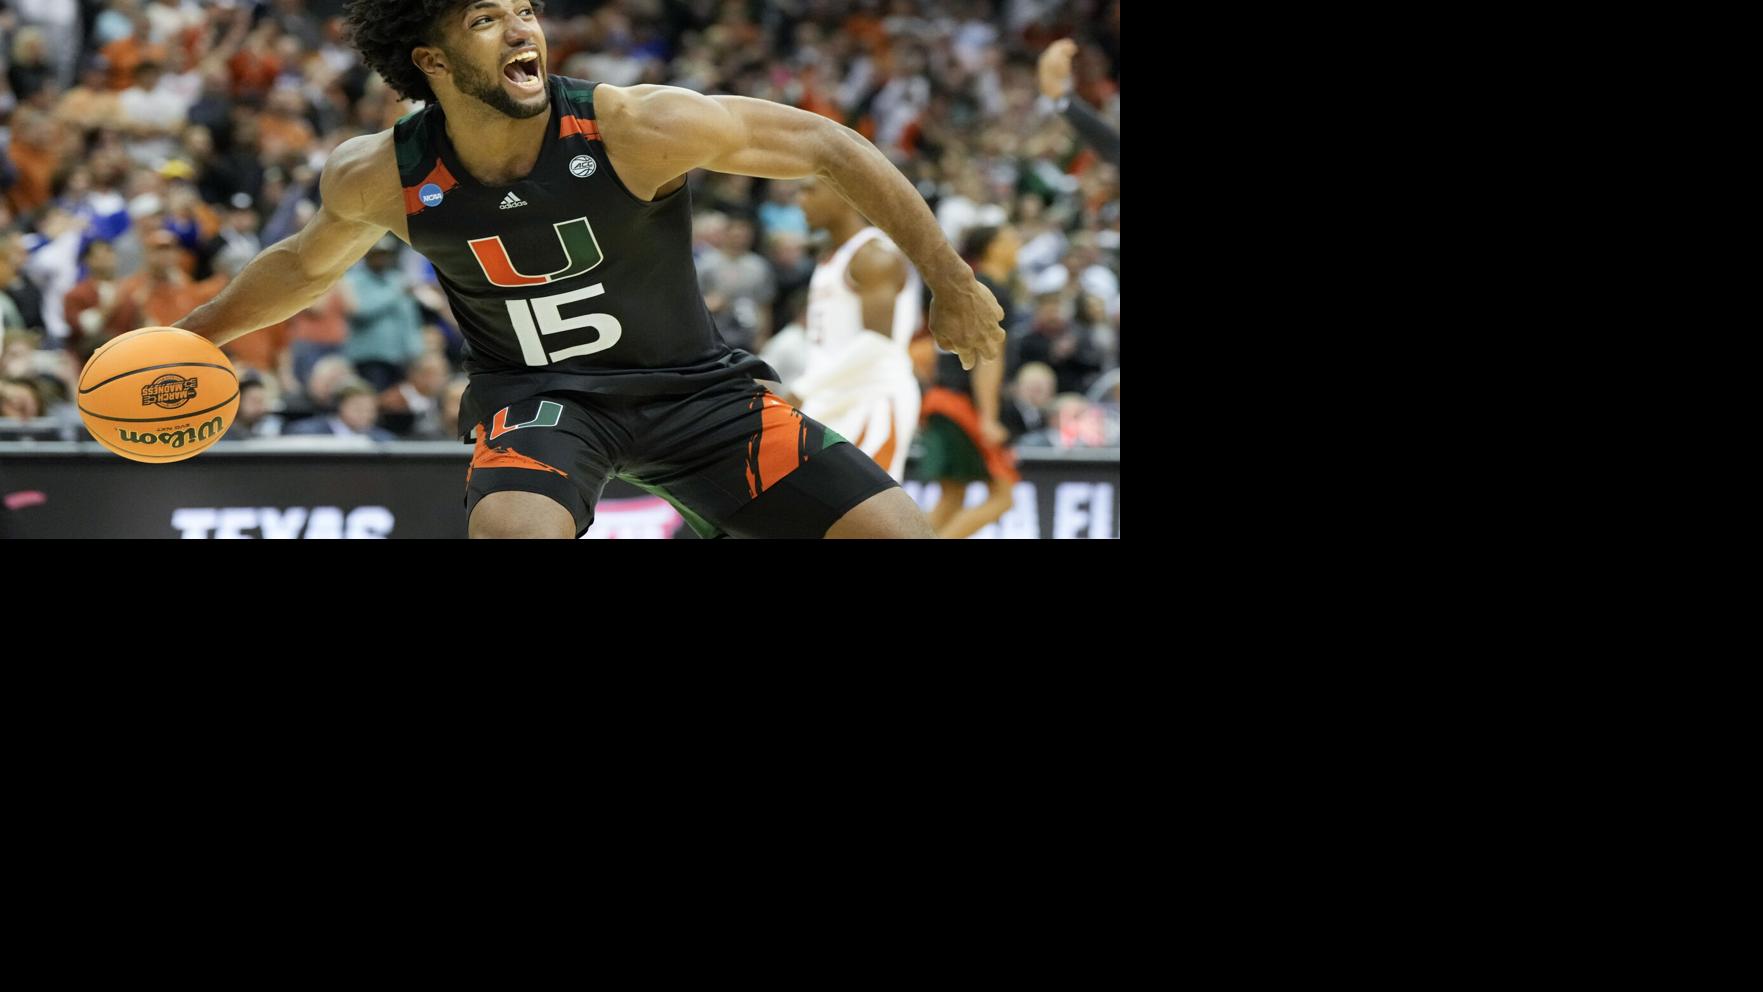 Miller, Wong rally Miami past Texas 88-81 for first Final Four